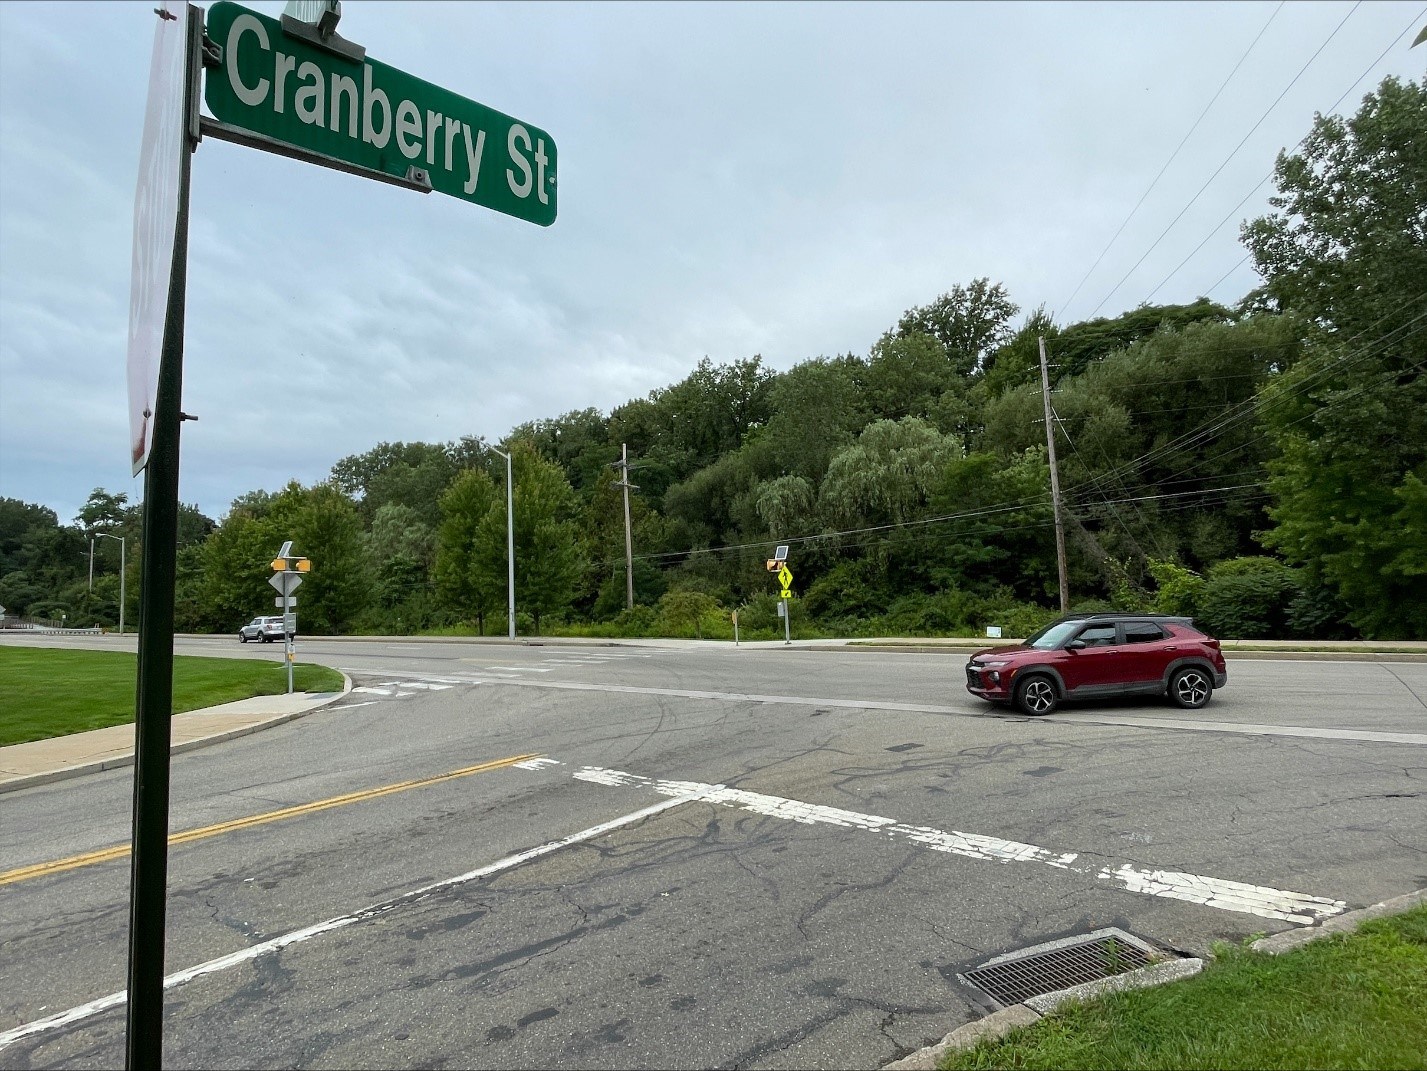 Pennsylvania Department of Transportation Updates Plans for Cranberry Street Improvement Project in the City of Erie